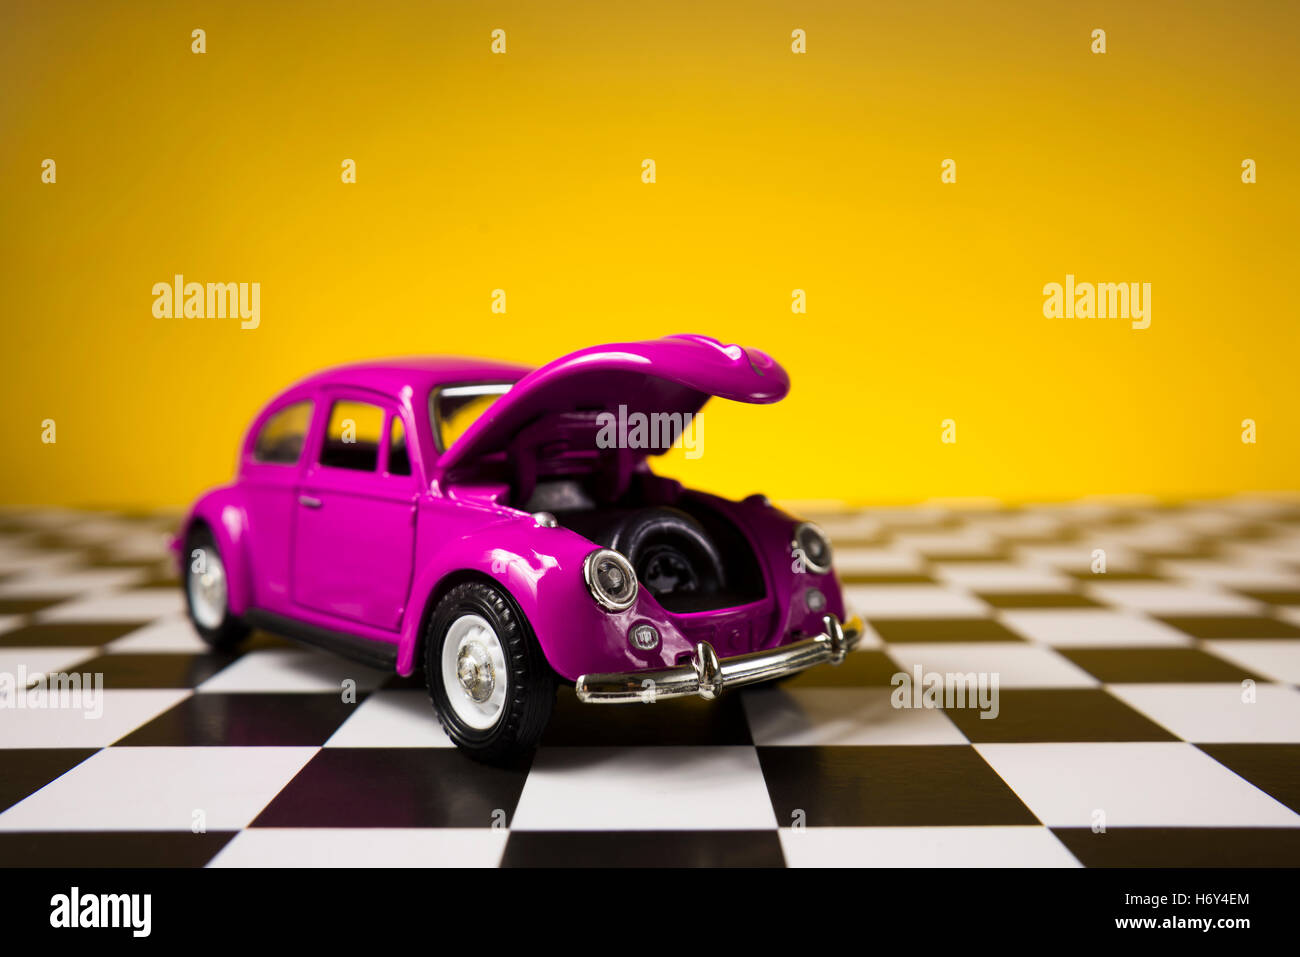 Izmir, Turkey - November 21, 2015. Still life shot of a Pink volkswagen beetle on a yellow background and checked floor. Stock Photo